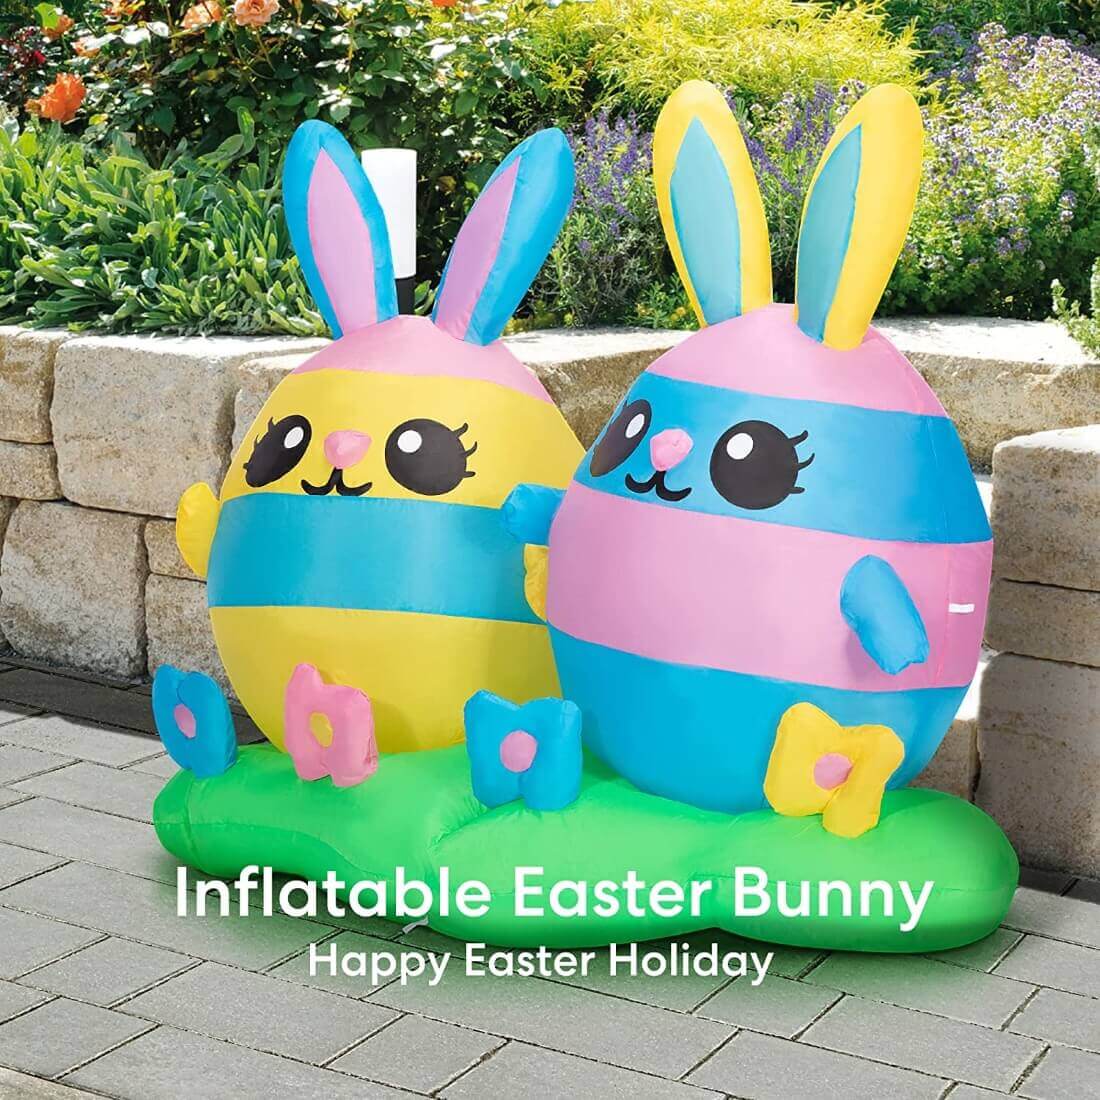 VIVOHOME 4ft Height Multicolored Inflatable 2 Easter Bunny Pastel Rabbit Eggs with Flower Field Built-in LED Lights Blow up Outdoor Lawn Yard Decoration